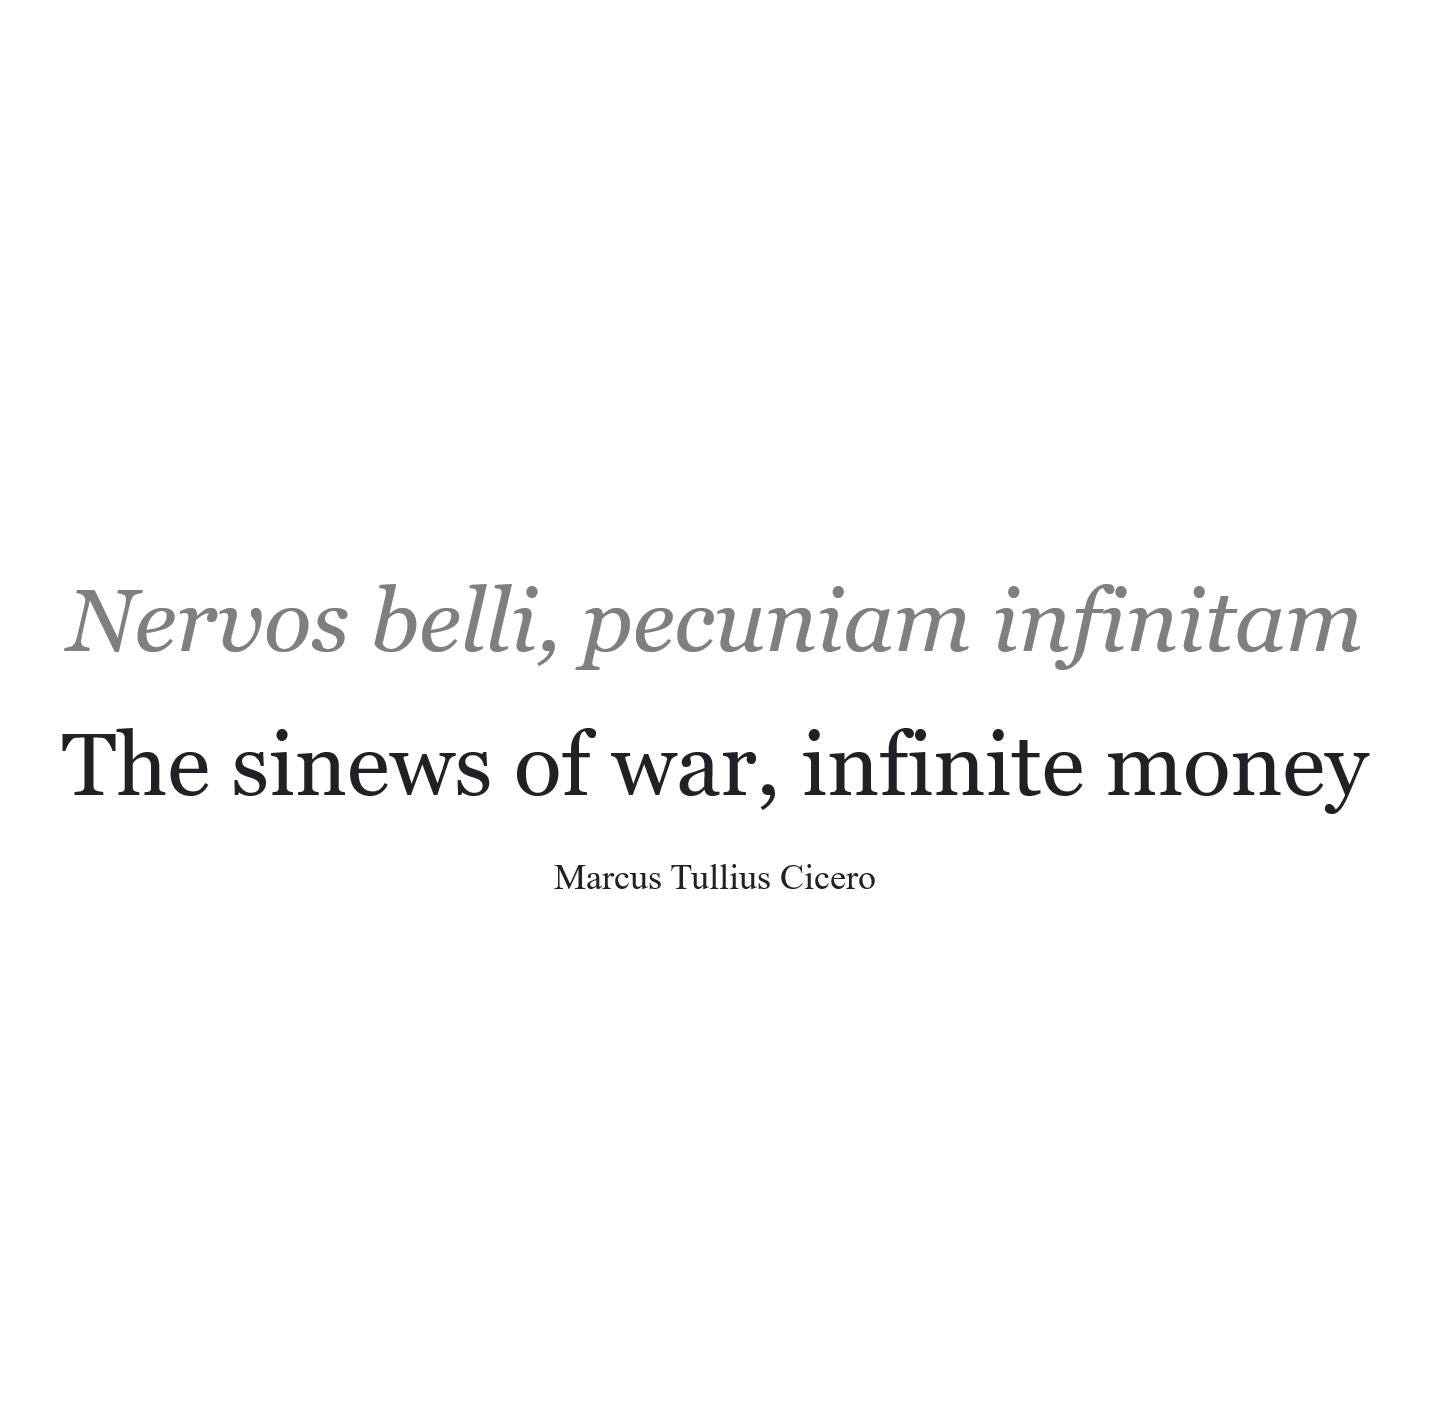 May be an image of text that says 'Nervos belli, pecuniam infinitam The sinews of war, infinite money Marcus Tullius Cicero'